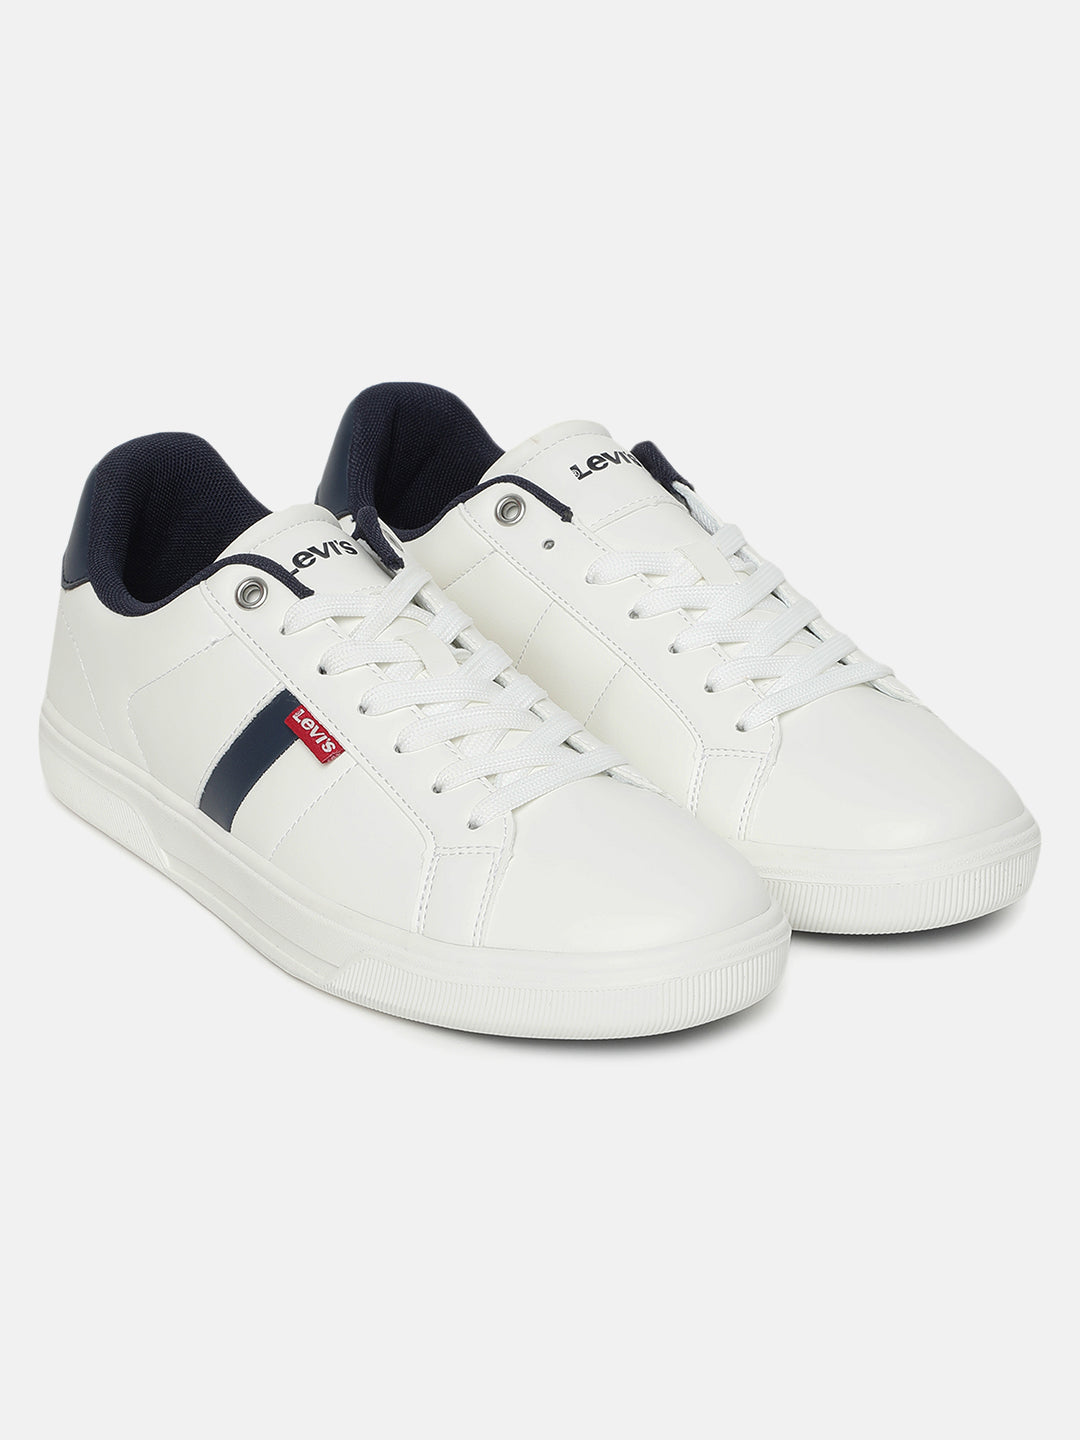 Levi's West chunky trainers in white | ASOS